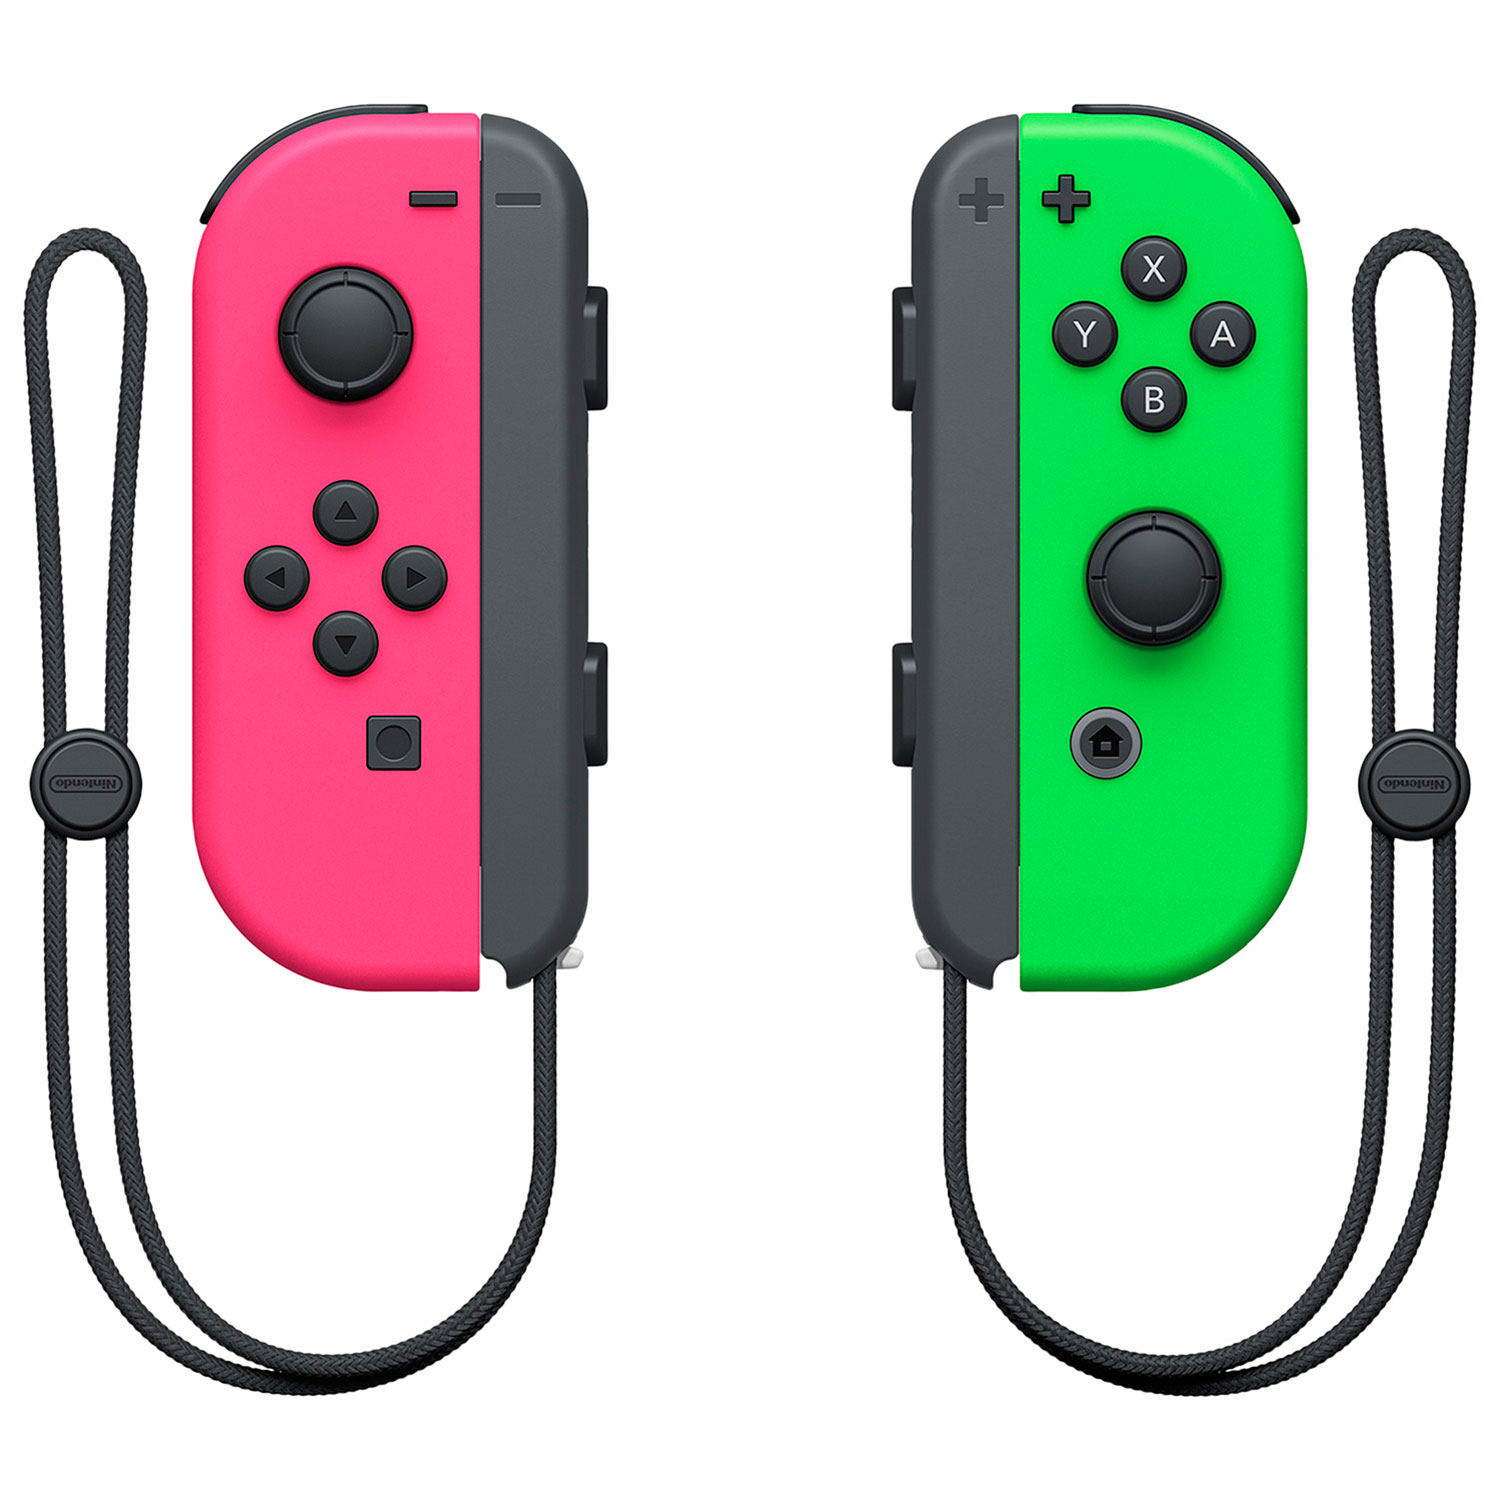 Nintendo Switch Left and Right Joy-Con Controllers - Neon Pink